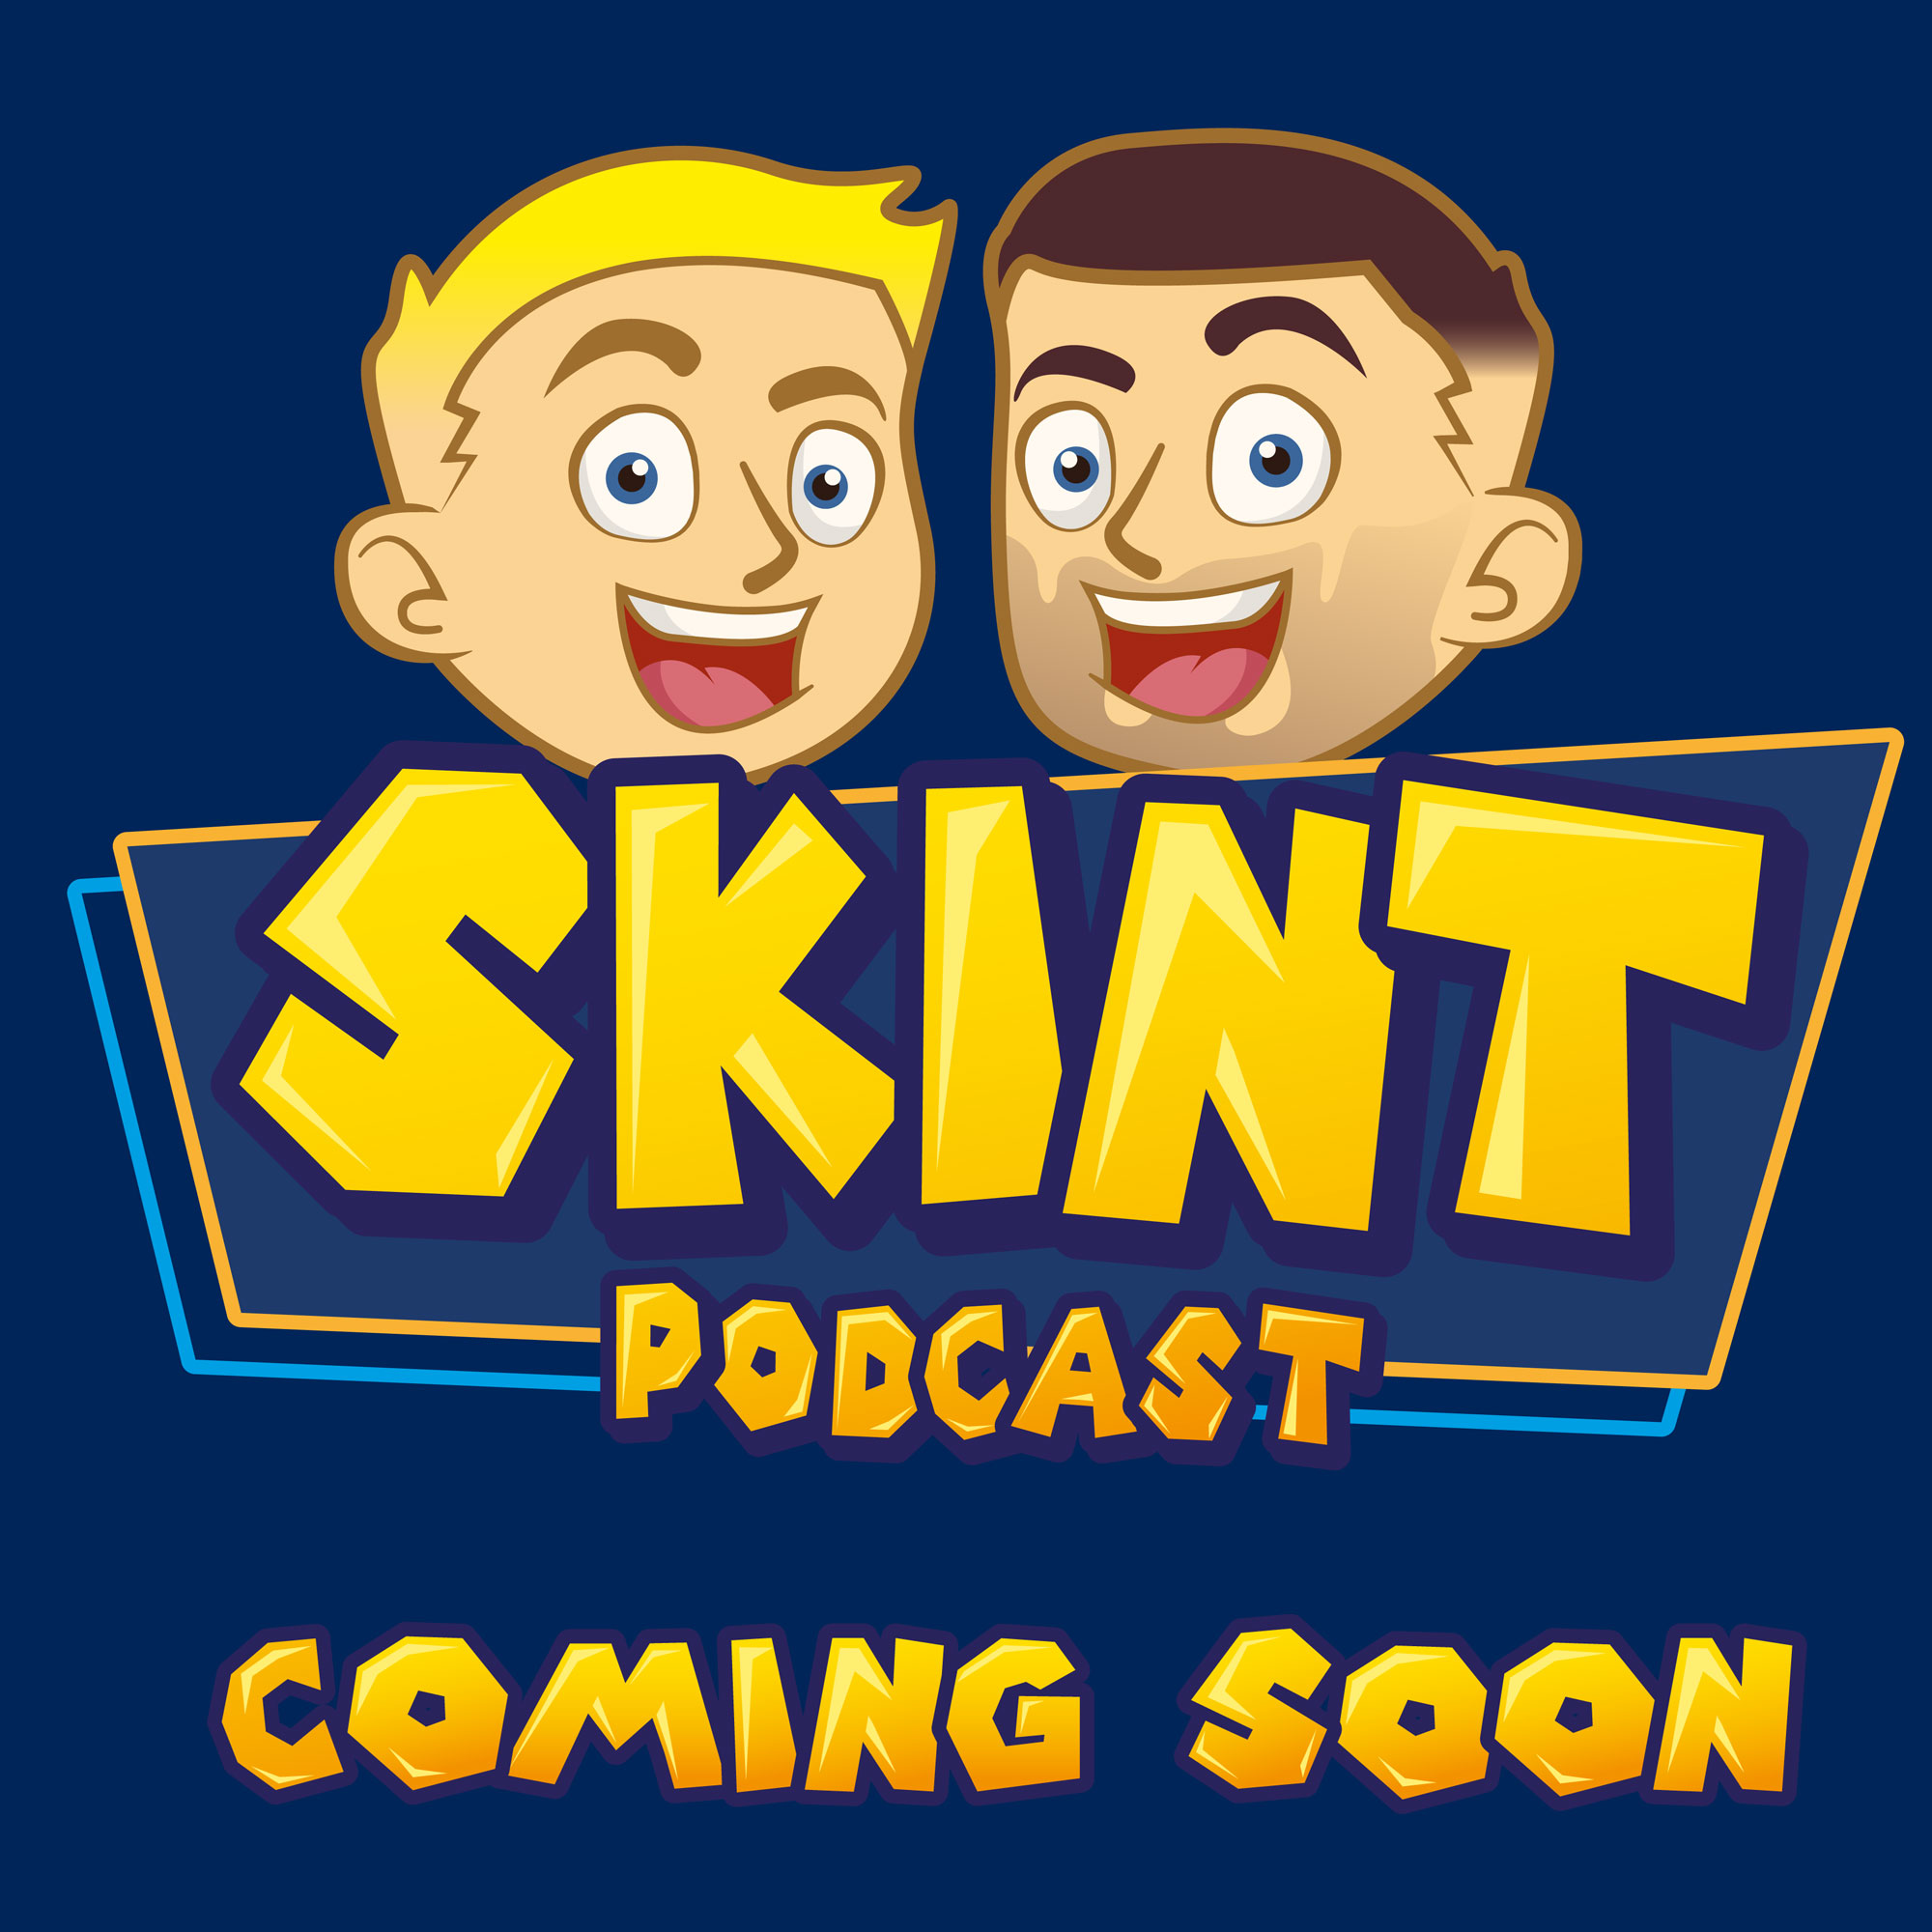 Skint Podcast - Coming Soon